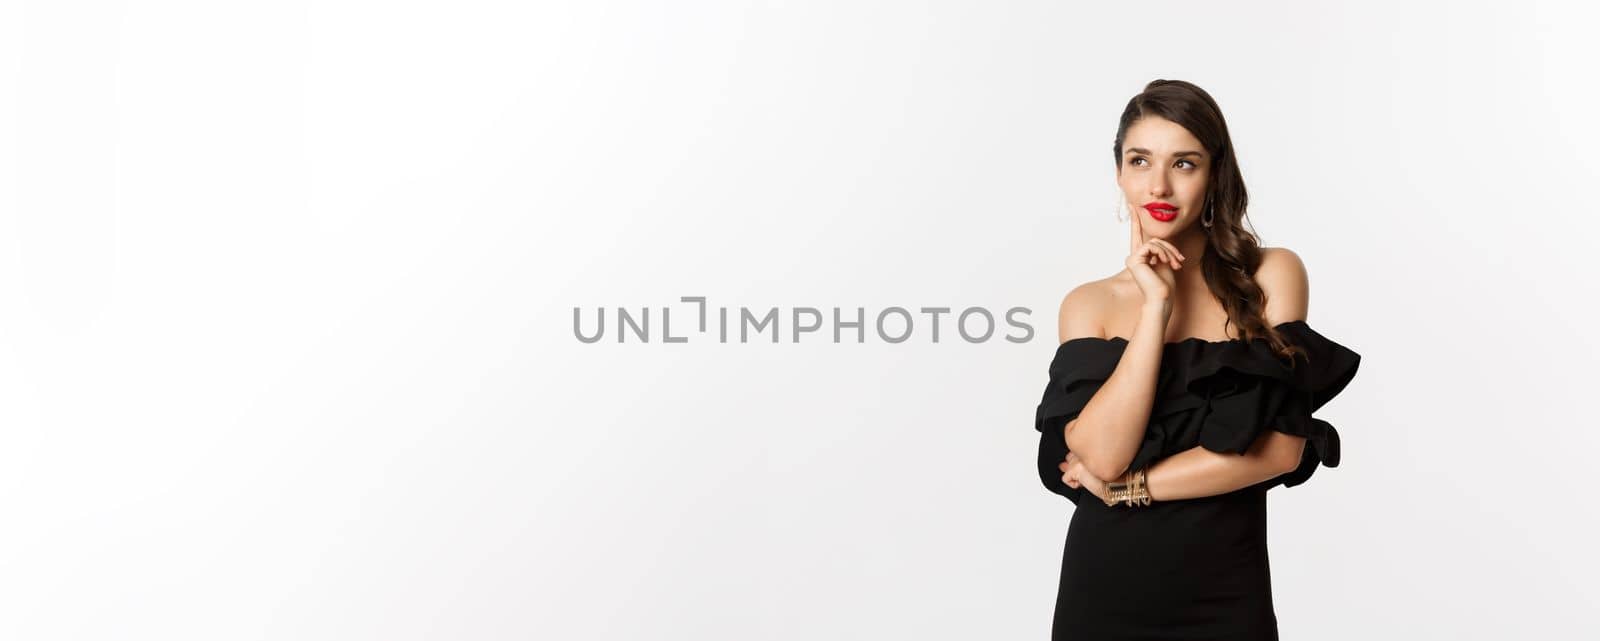 Fashion and beauty. Thoughtful young woman in black dress, smiling pleased and thinking, having an idea, white background.